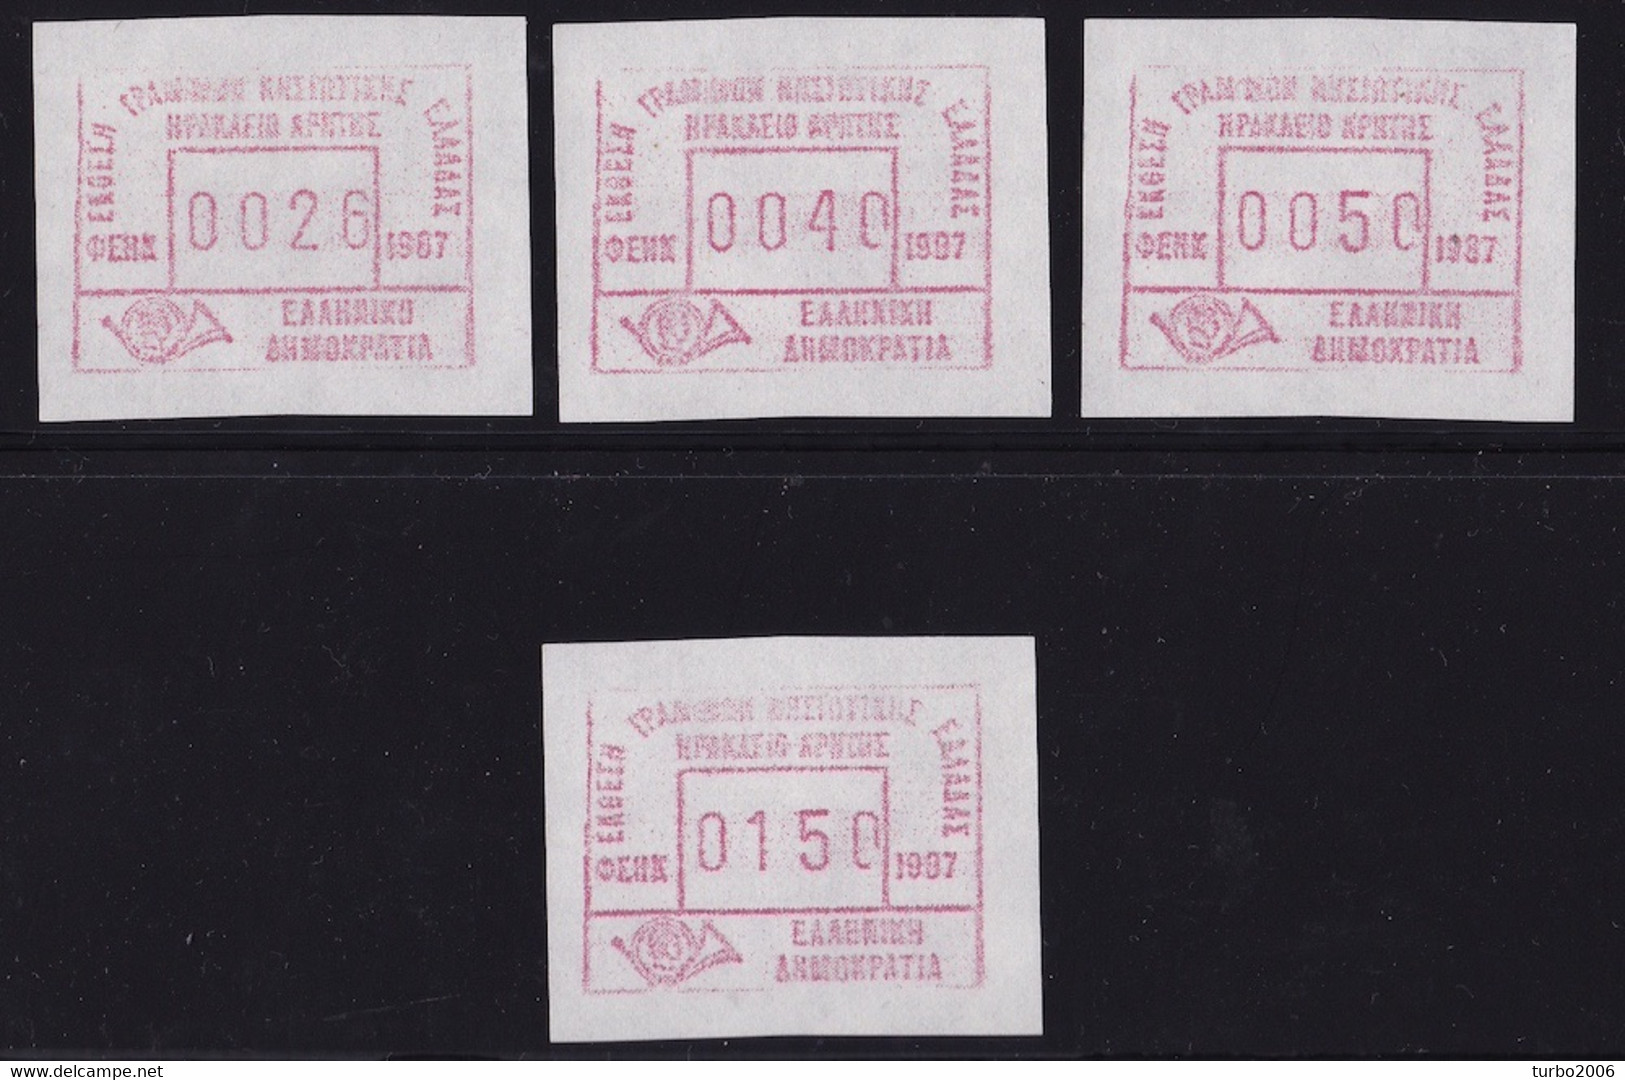 GREECE 1987 FRAMA Stamps For Philatelic Exhabition Of Heraklion Exhabition Set Of 26-40-50 Dr + 150 D MNH Hellas M 14 I - Automatenmarken [ATM]